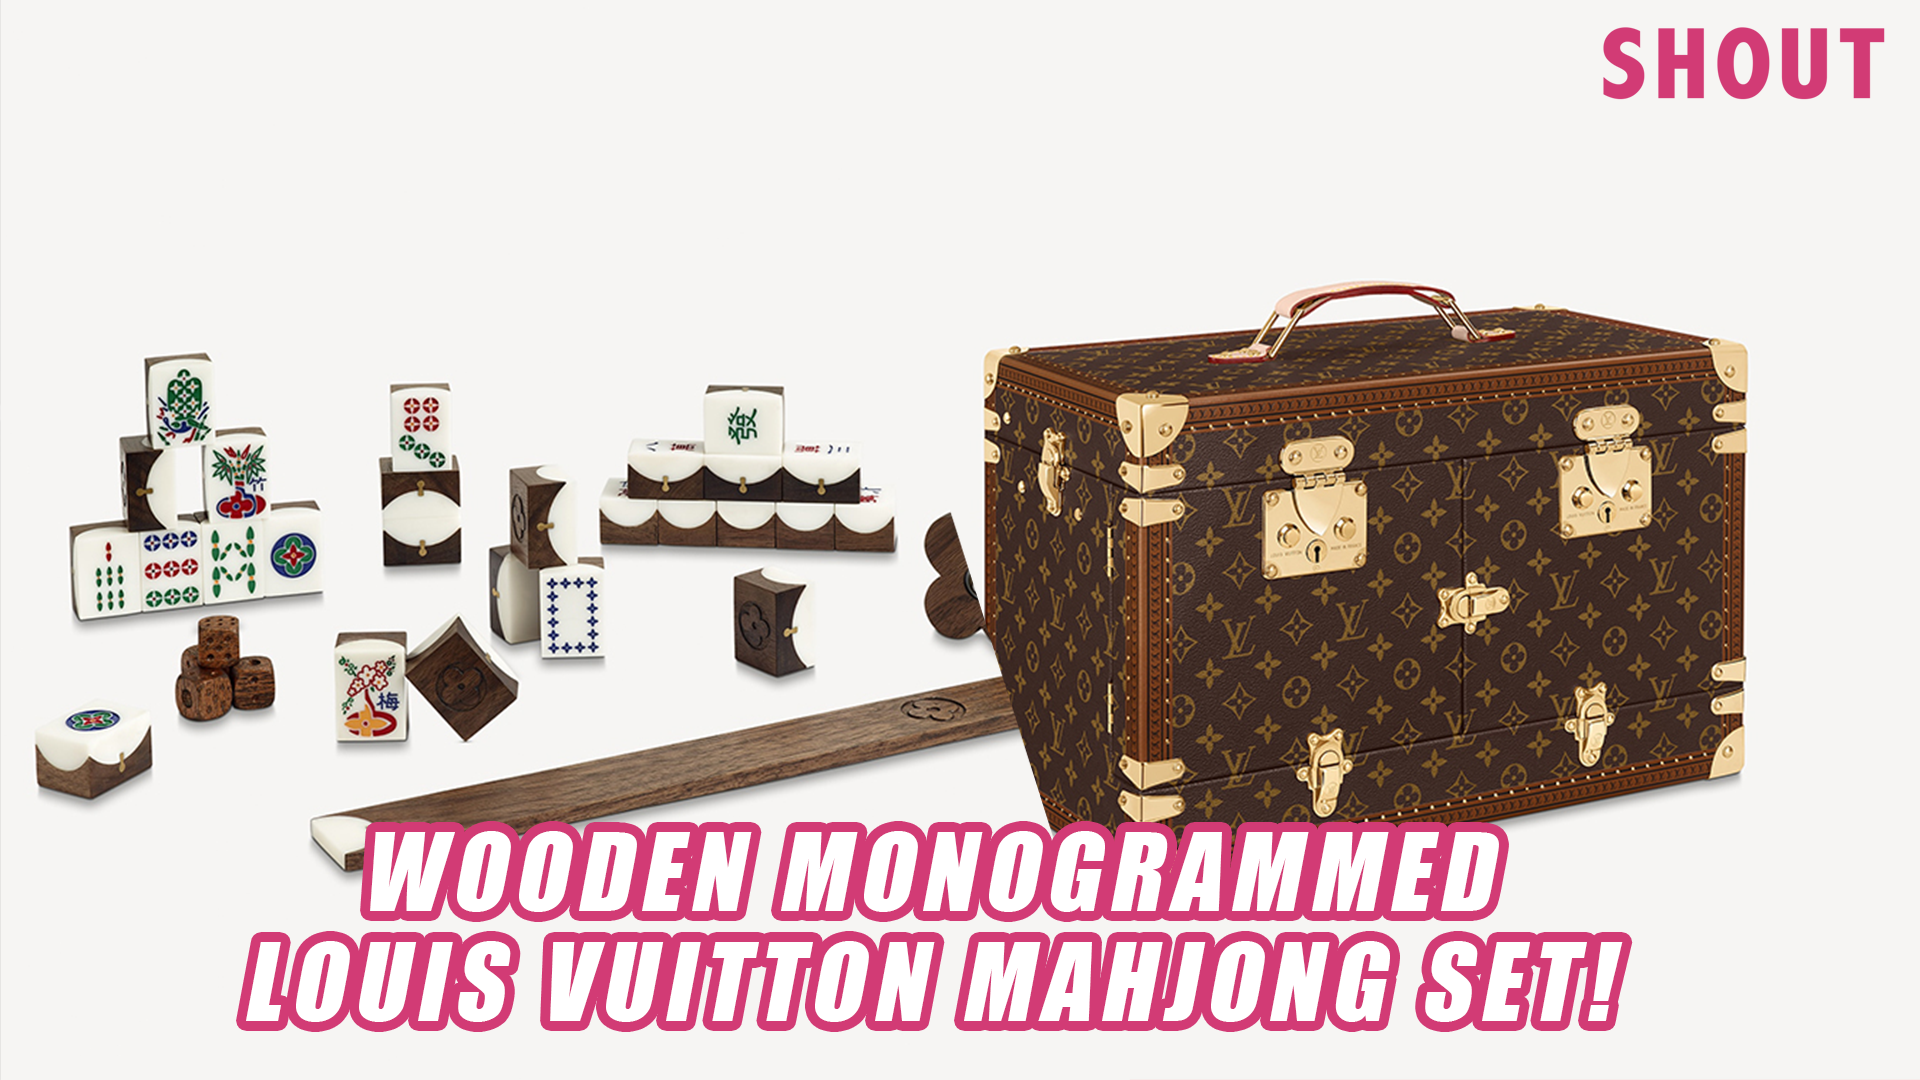 SHOUT on Instagram: LOUIS VUITTON HAS A NEW MONOGRAMMED LUXE